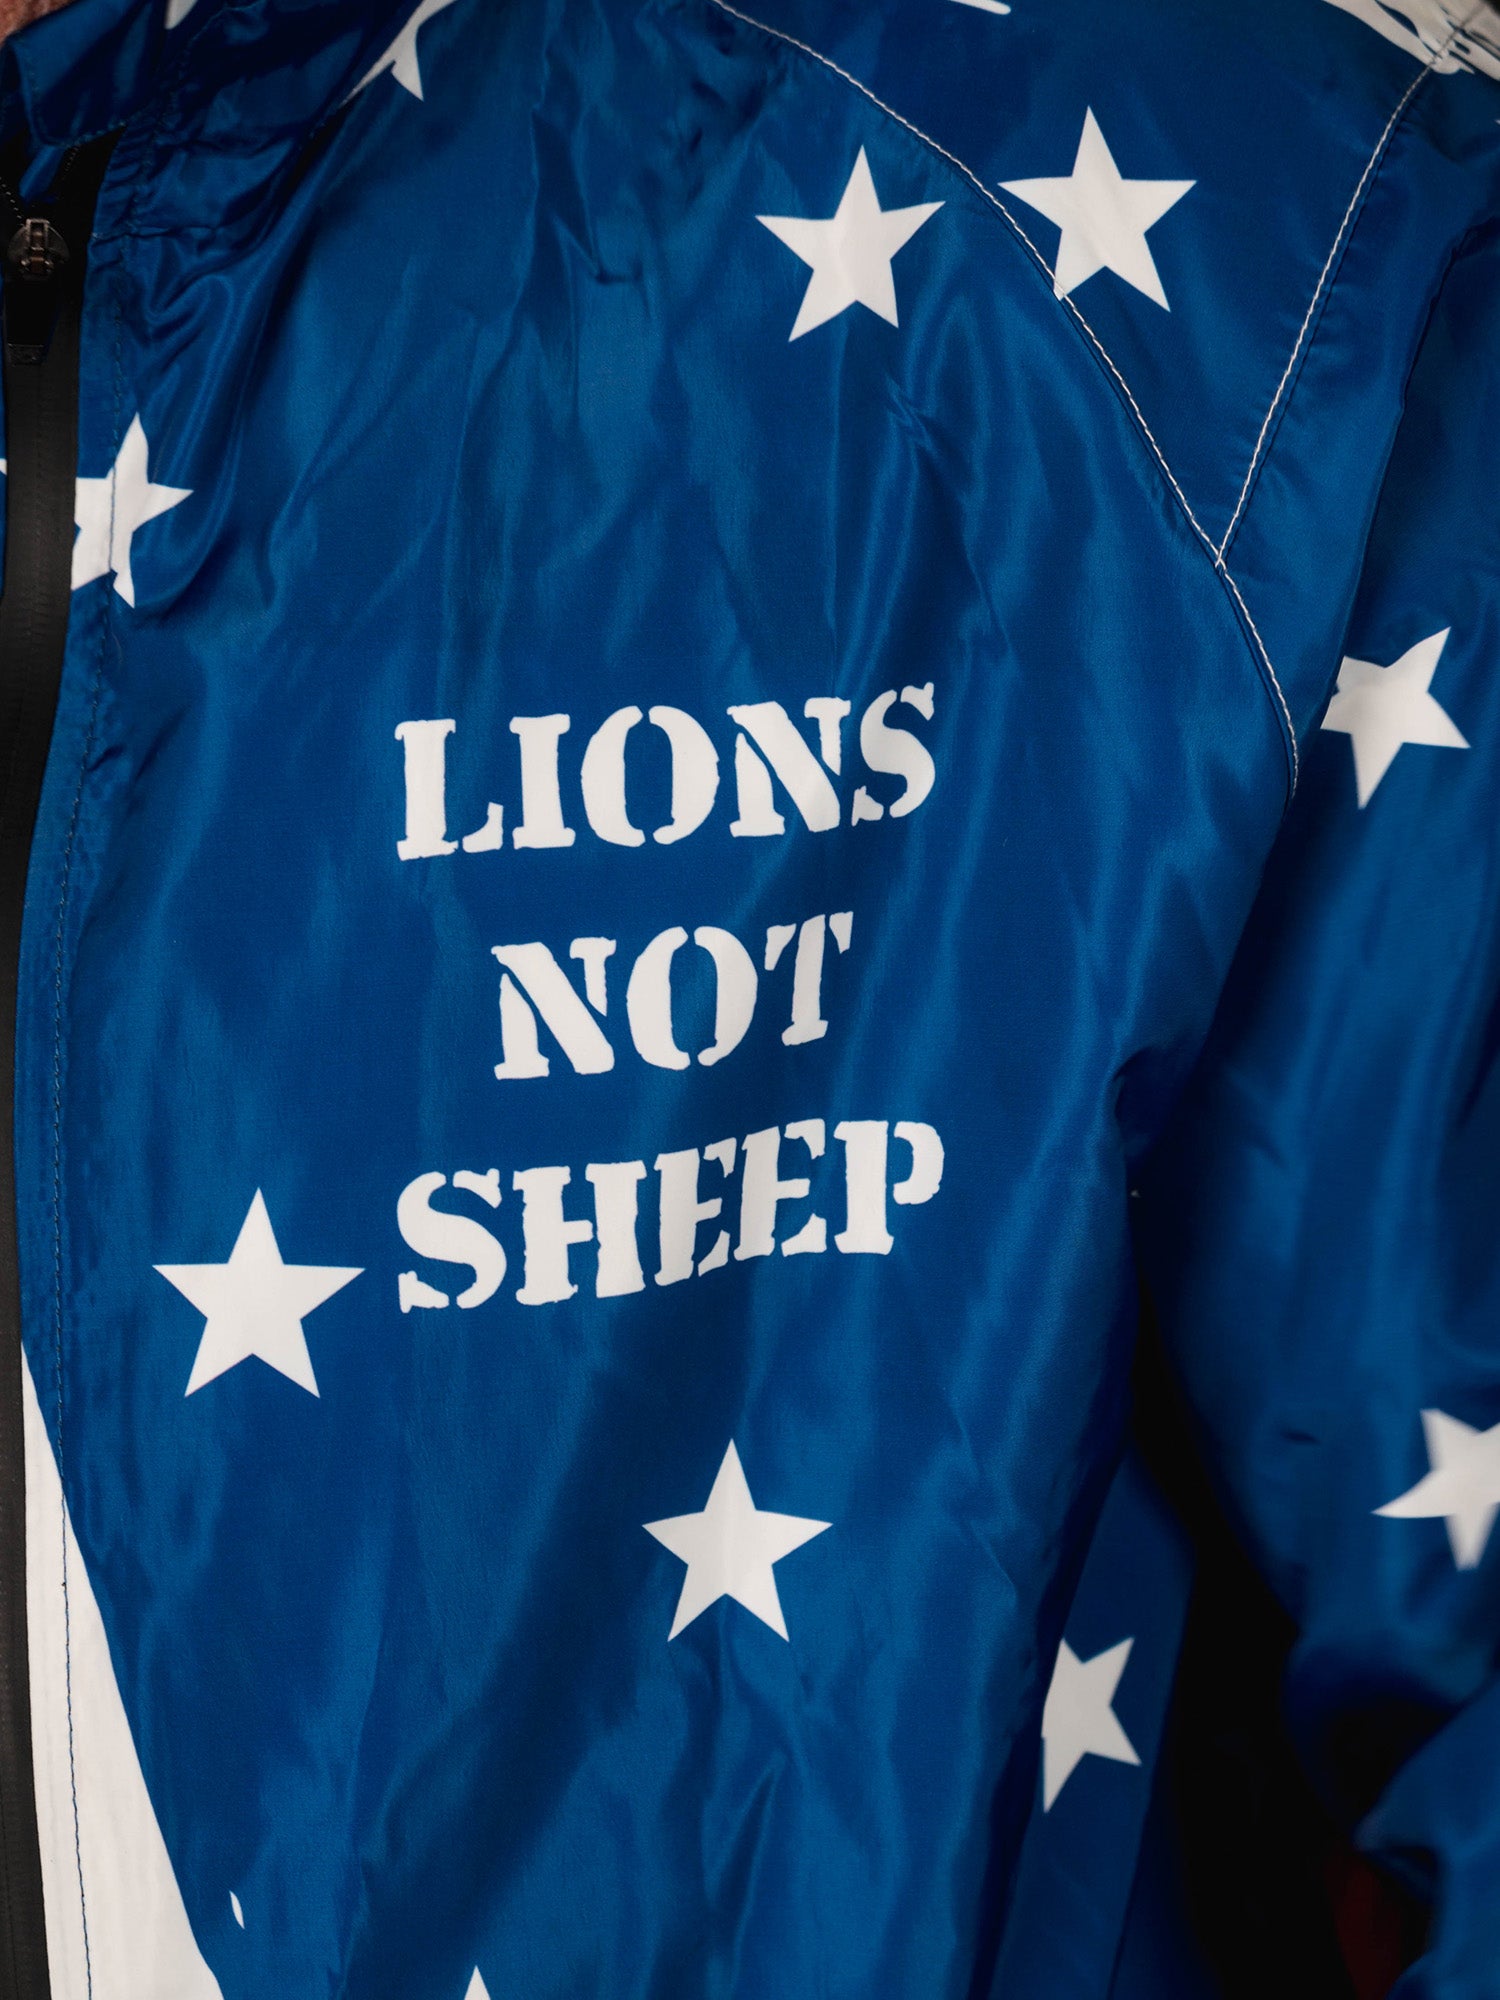 LIONS NOT SHEEP OG Outer-Shell Jacket (Red, White & Blue) - Lions Not Sheep ®